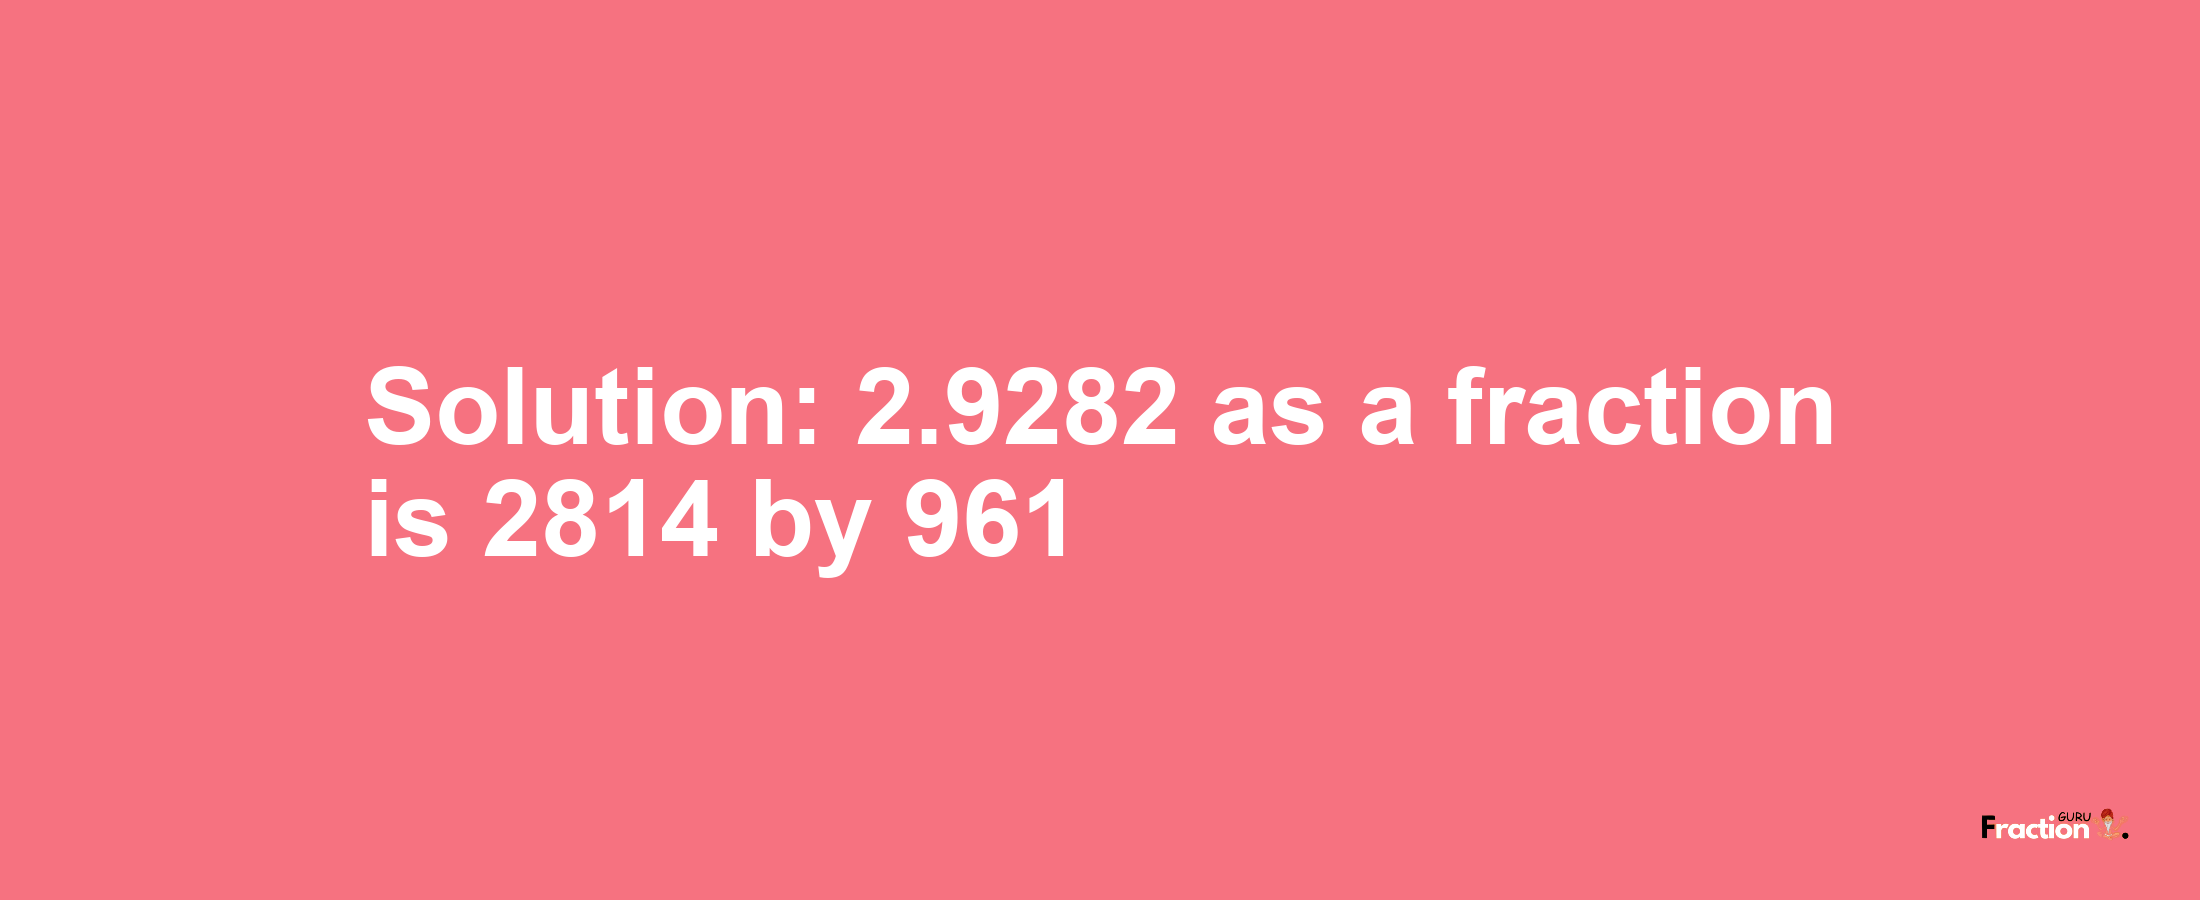 Solution:2.9282 as a fraction is 2814/961